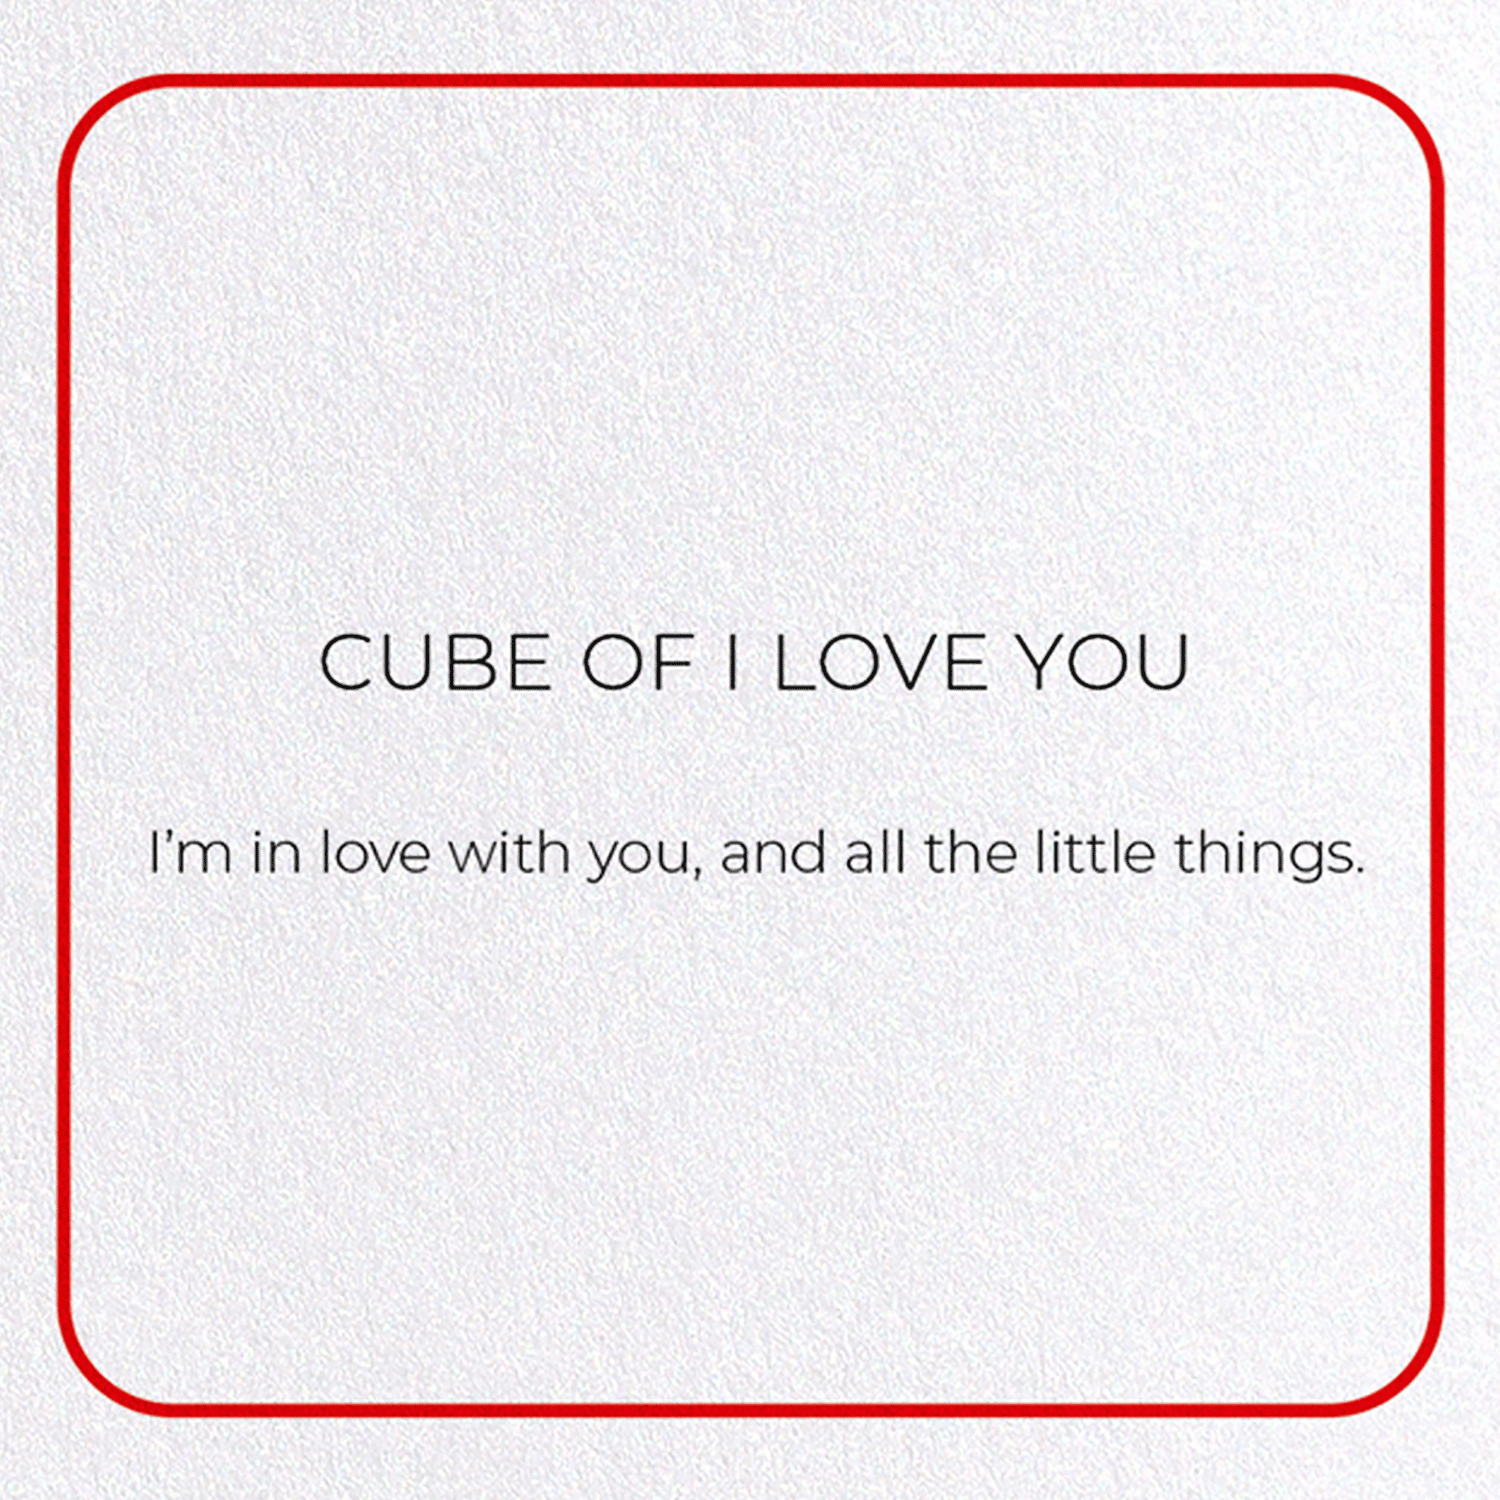 CUBE OF I LOVE YOU